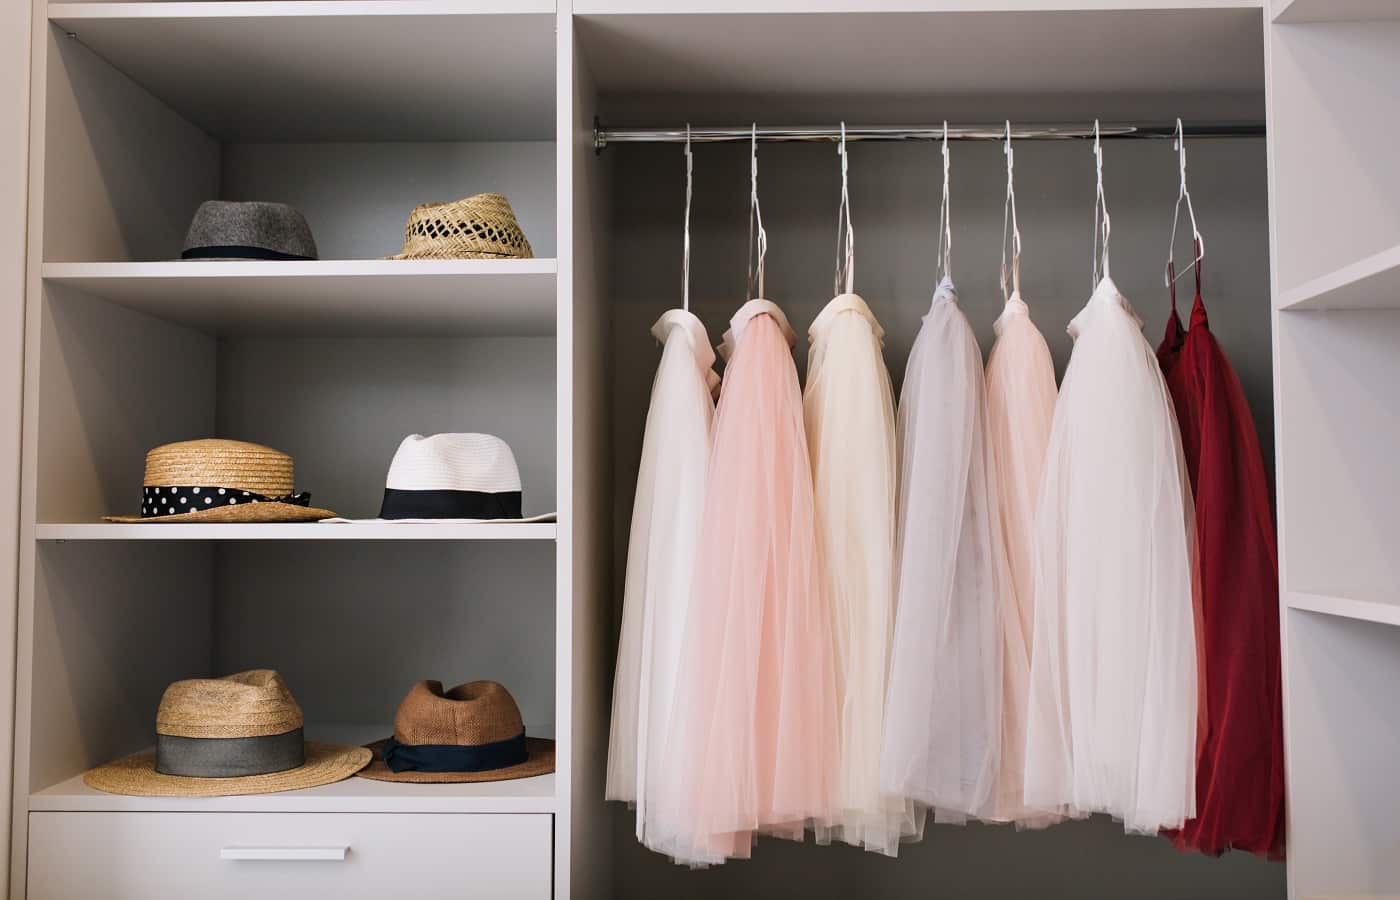 Modern bright dressing room with shelves. Fashionable hats, beautiful pink and red dresses hanging in wardrobe